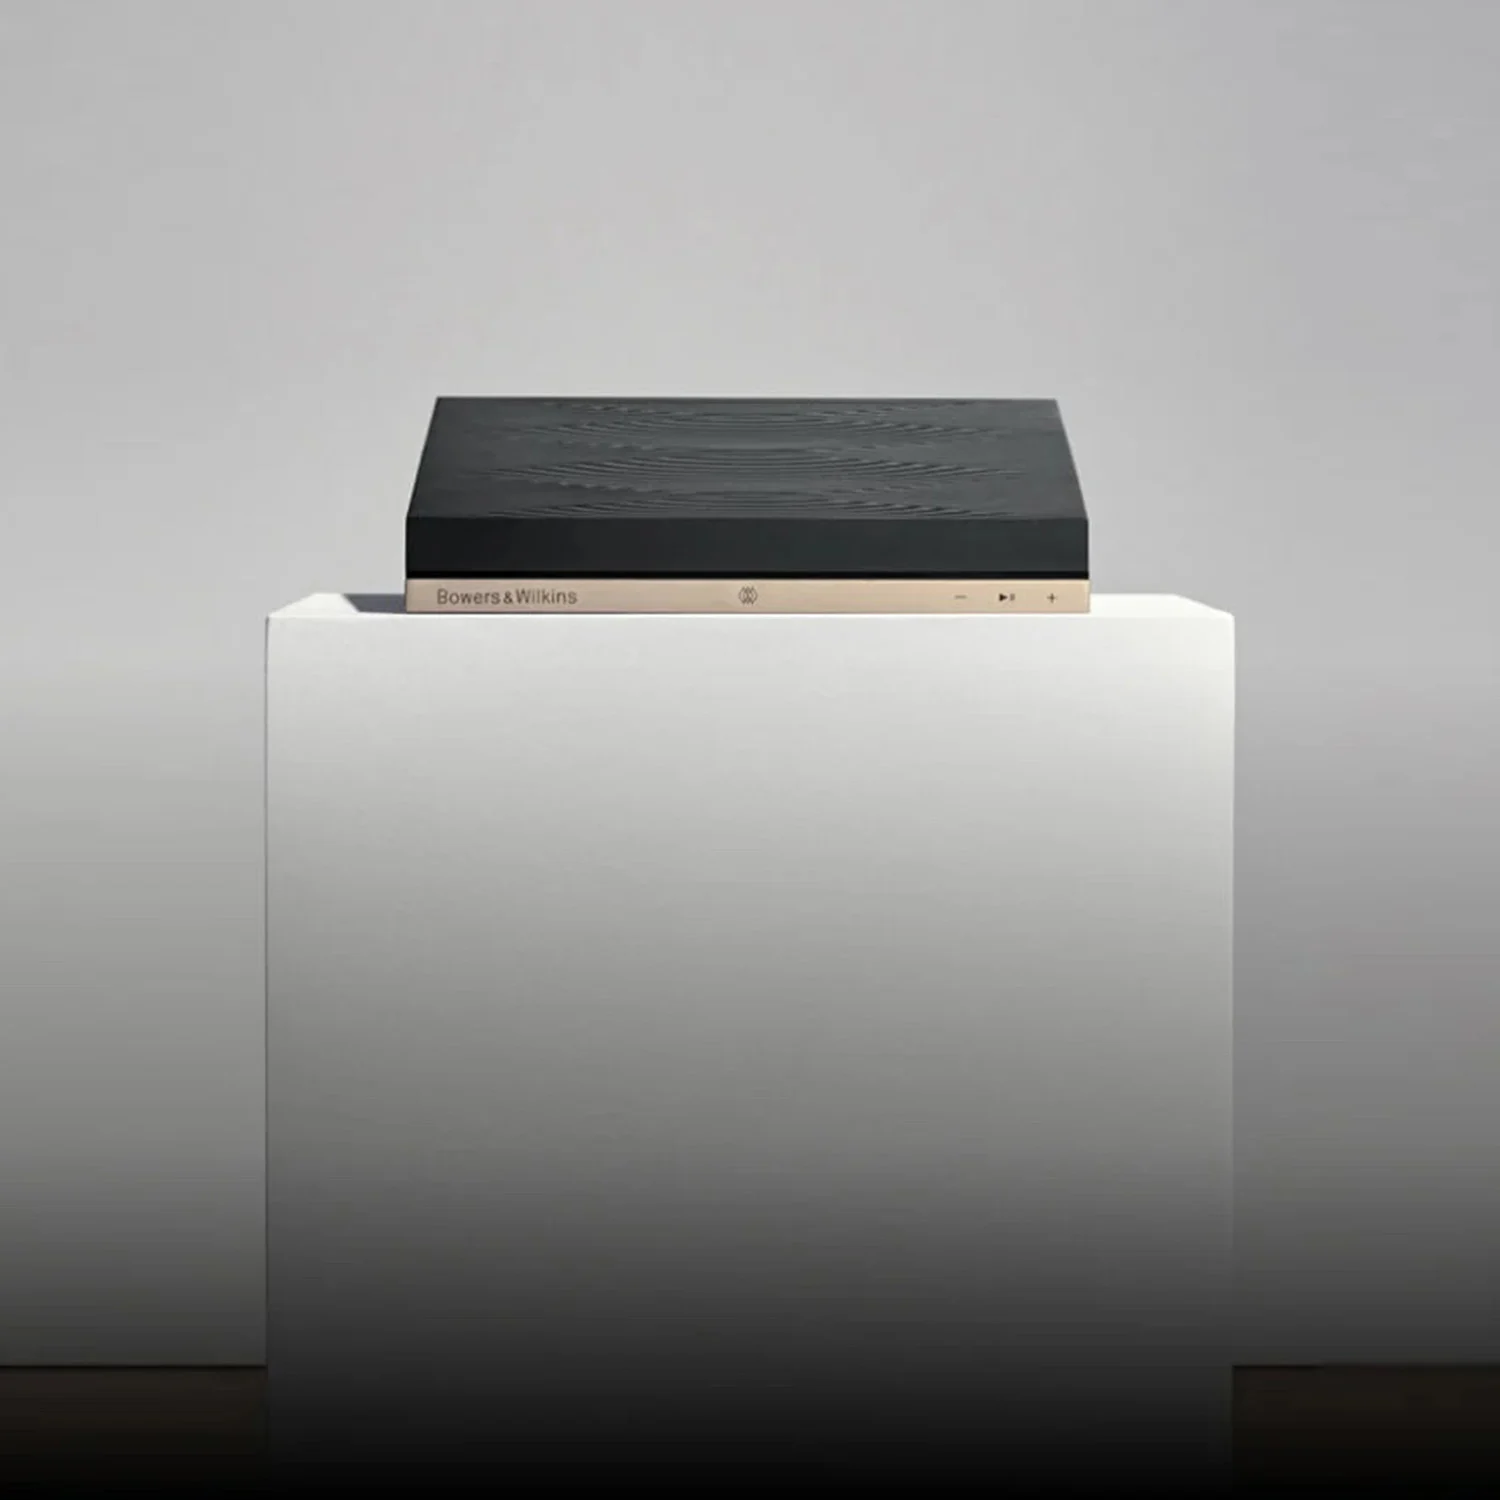 Bowers & Wilkins - The Sound Organisation